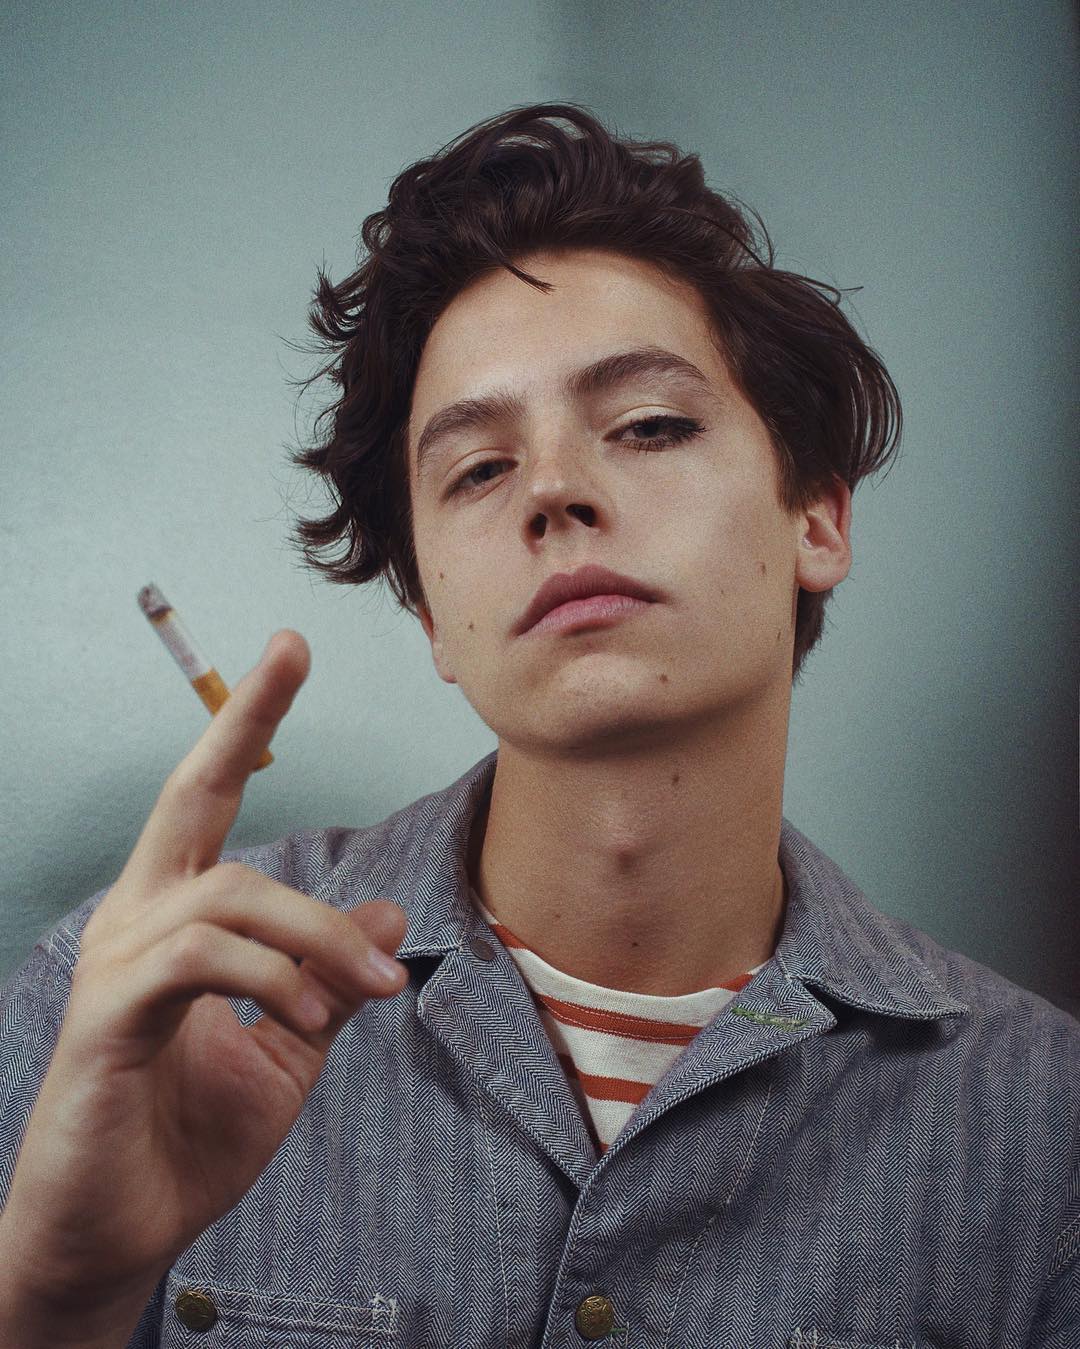 imapreviewfangirl: A Dissection Of The Cole Sprouse Effect